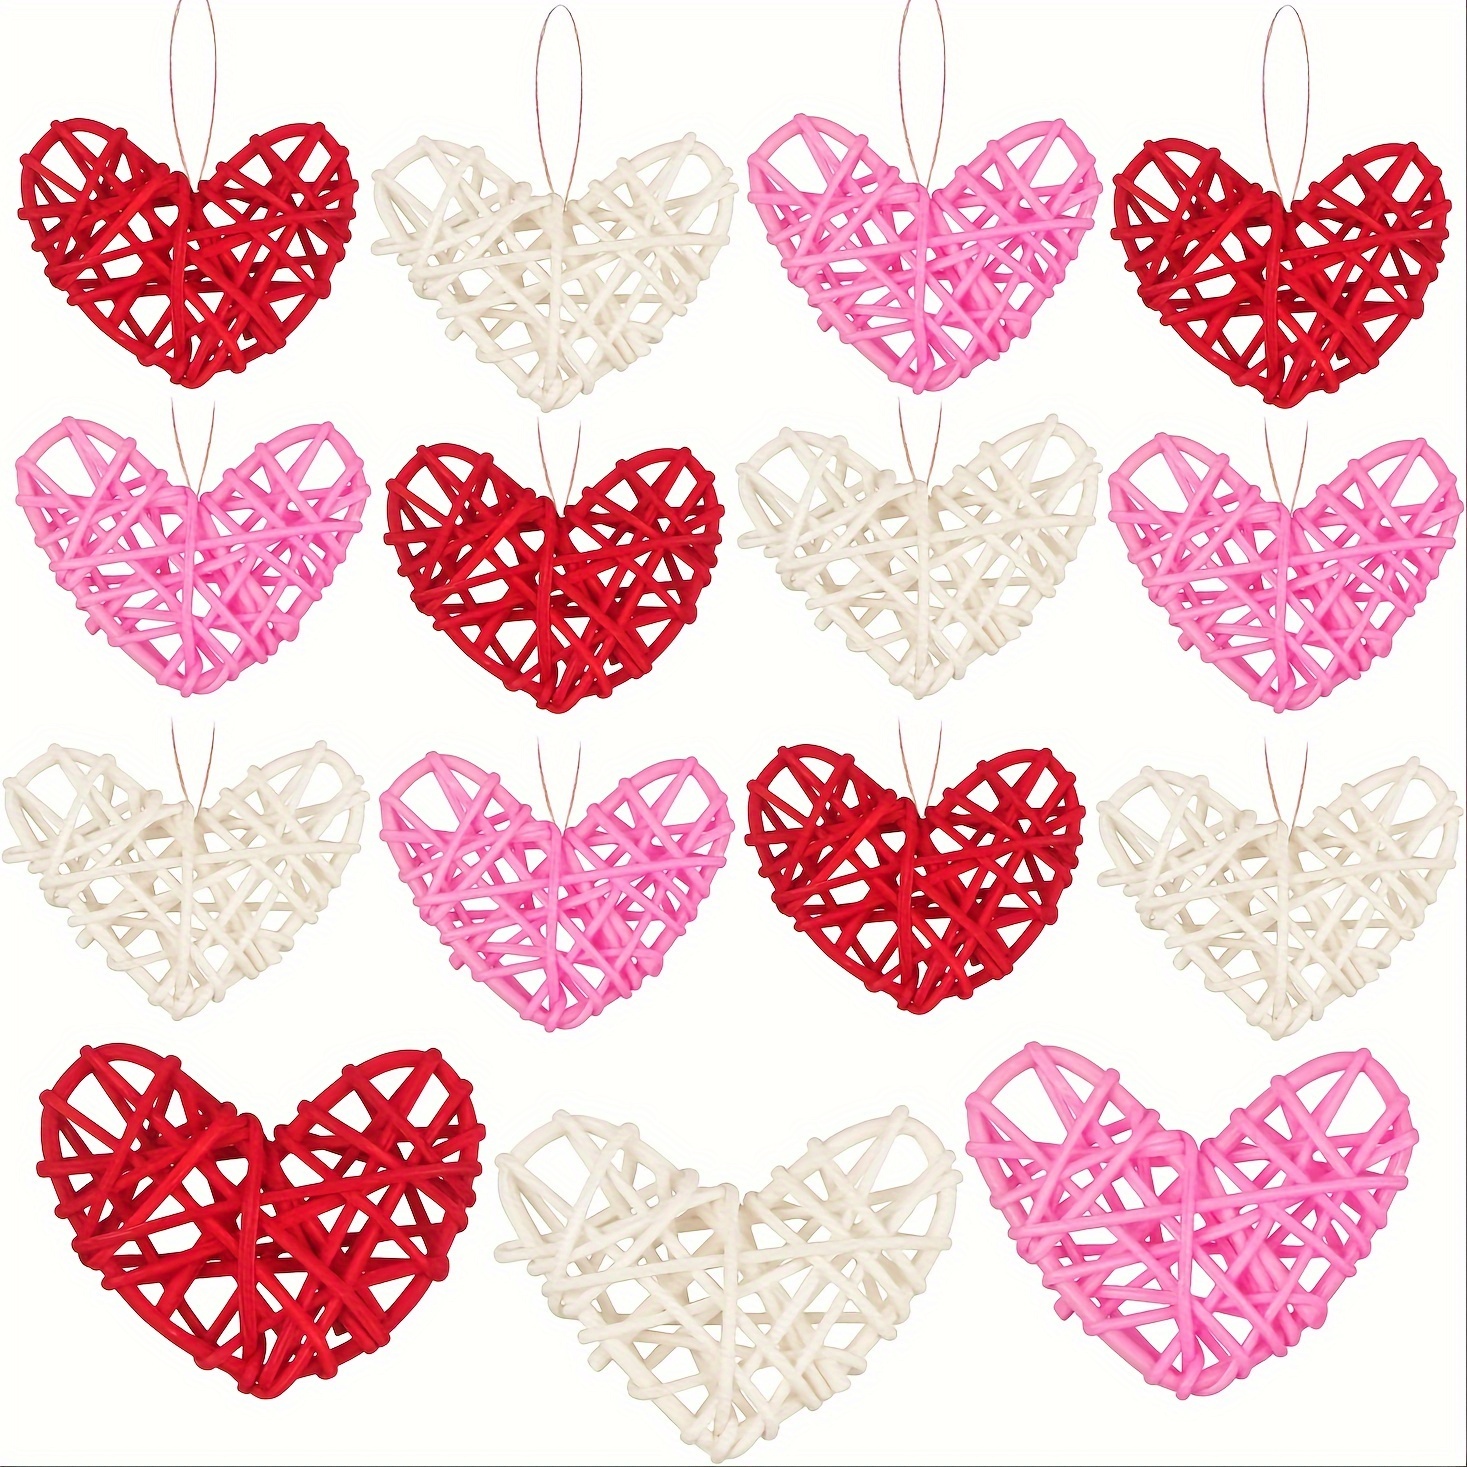  Geosar 24 Pieces Heart Rattan Balls, Valentines Day Rattan  Balls Natural Wicker Heart Shaped Balls 4 Colors for Valentine's Day  Wedding DIY Craft Home Decor Vase Fillers(Rattan, 4 Inch) : Home